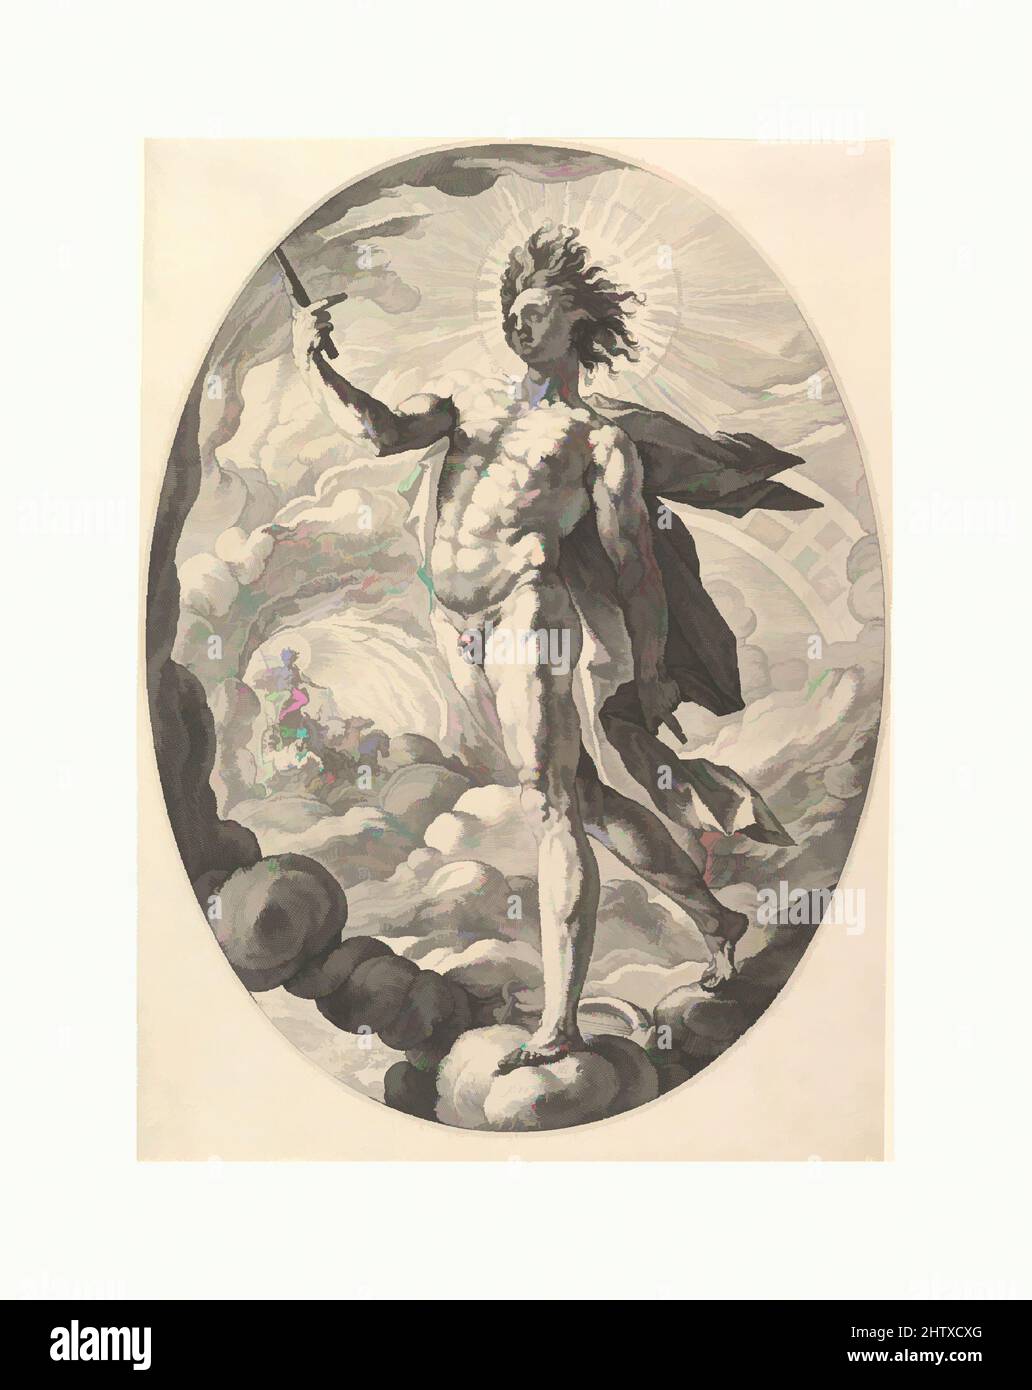 Art inspired by Apollo, 1588, Engraving, Sheet: 10 3/8 x 13 3/4 in. (26.4 x 34.9 cm), Prints, Hendrick Goltzius (Netherlandish, Mühlbracht 1558–1617 Haarlem), The elegant figure of Apollo strides forward on a swirling bank of clouds. The sun god's hair rises in the air like flames. The, Classic works modernized by Artotop with a splash of modernity. Shapes, color and value, eye-catching visual impact on art. Emotions through freedom of artworks in a contemporary way. A timeless message pursuing a wildly creative new direction. Artists turning to the digital medium and creating the Artotop NFT Stock Photo